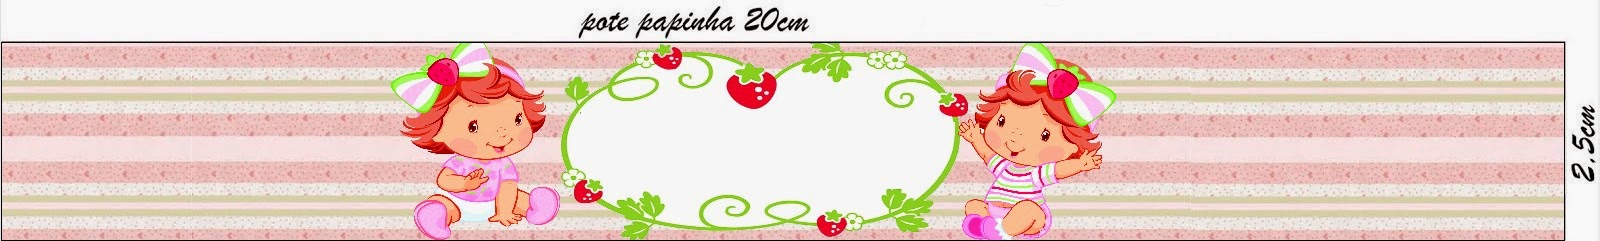 Strawberry Shortcake Baby Party Free Printable Candy Bar Party Labels.